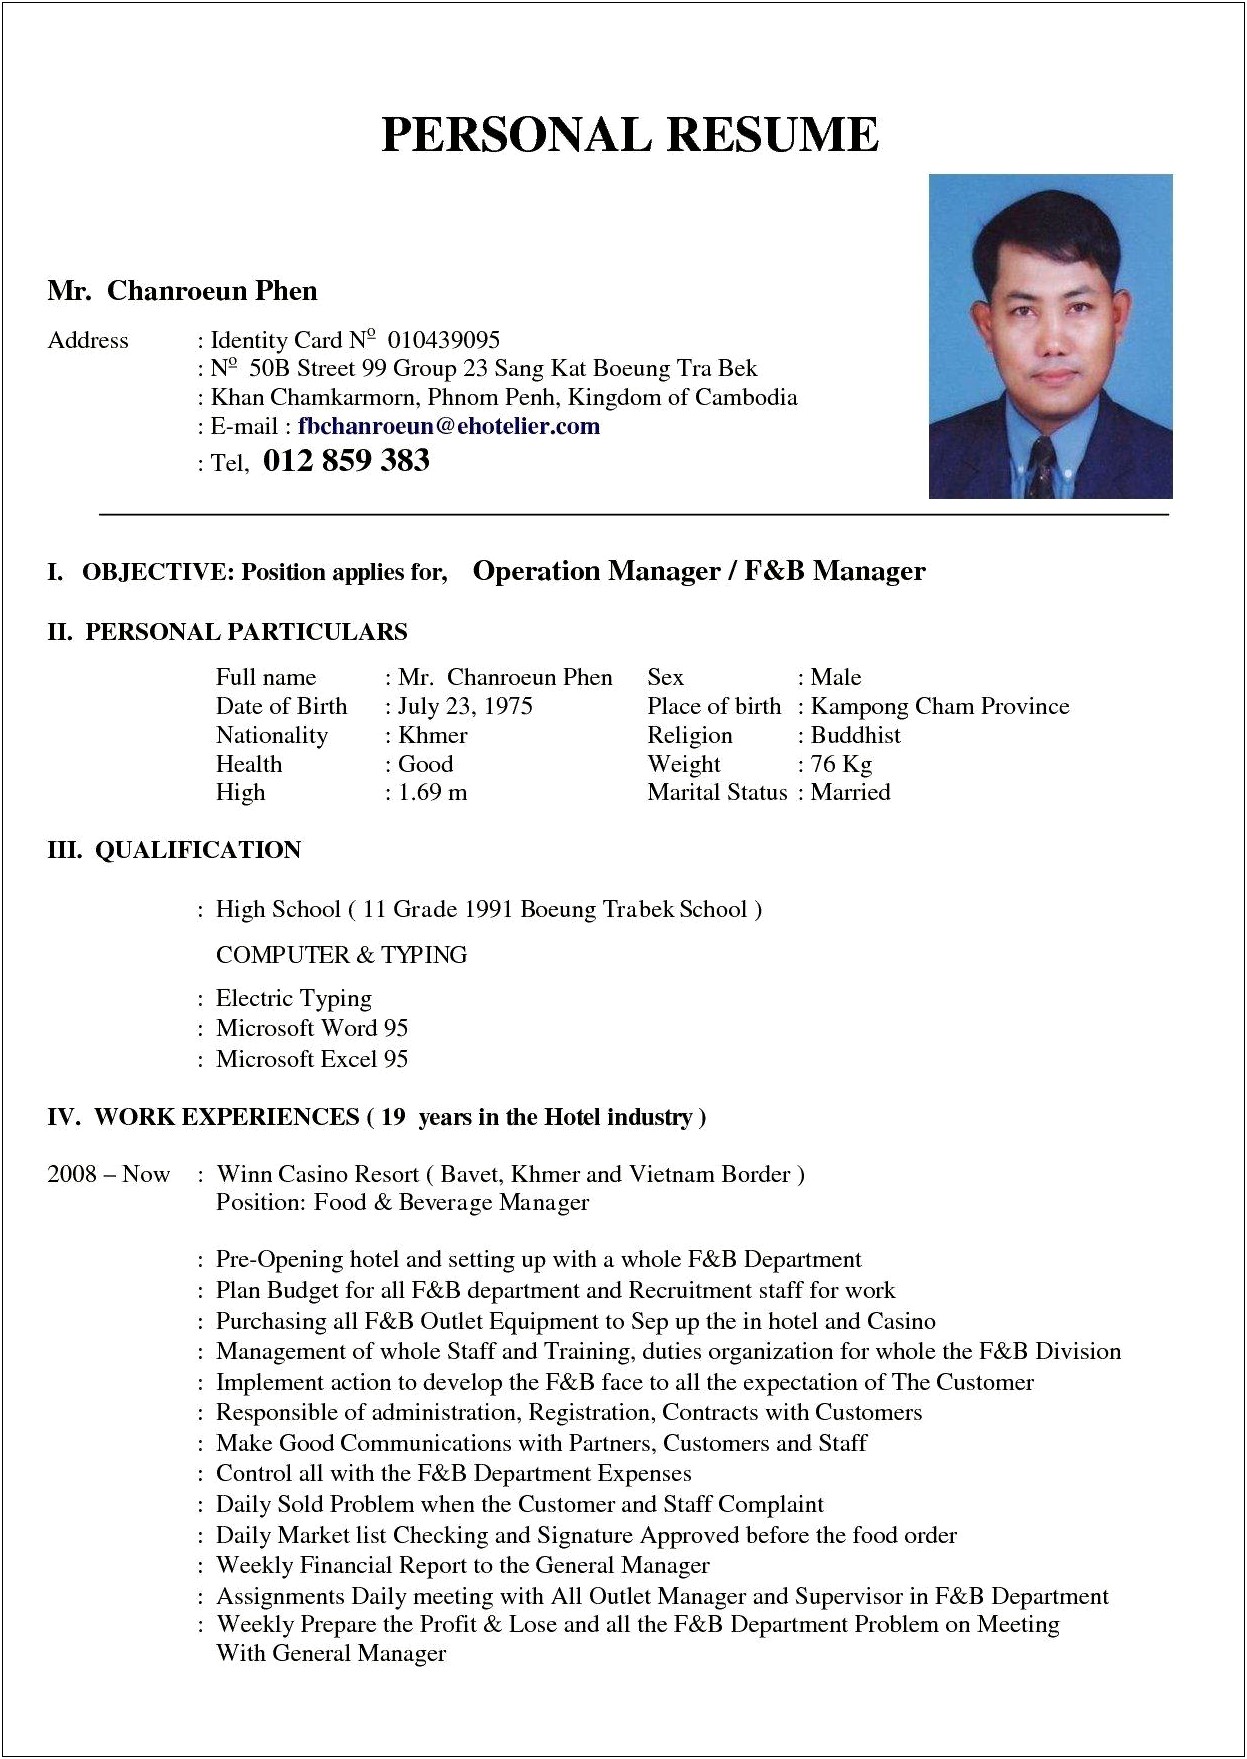 Resume Objective Examples For Hospitality Industry